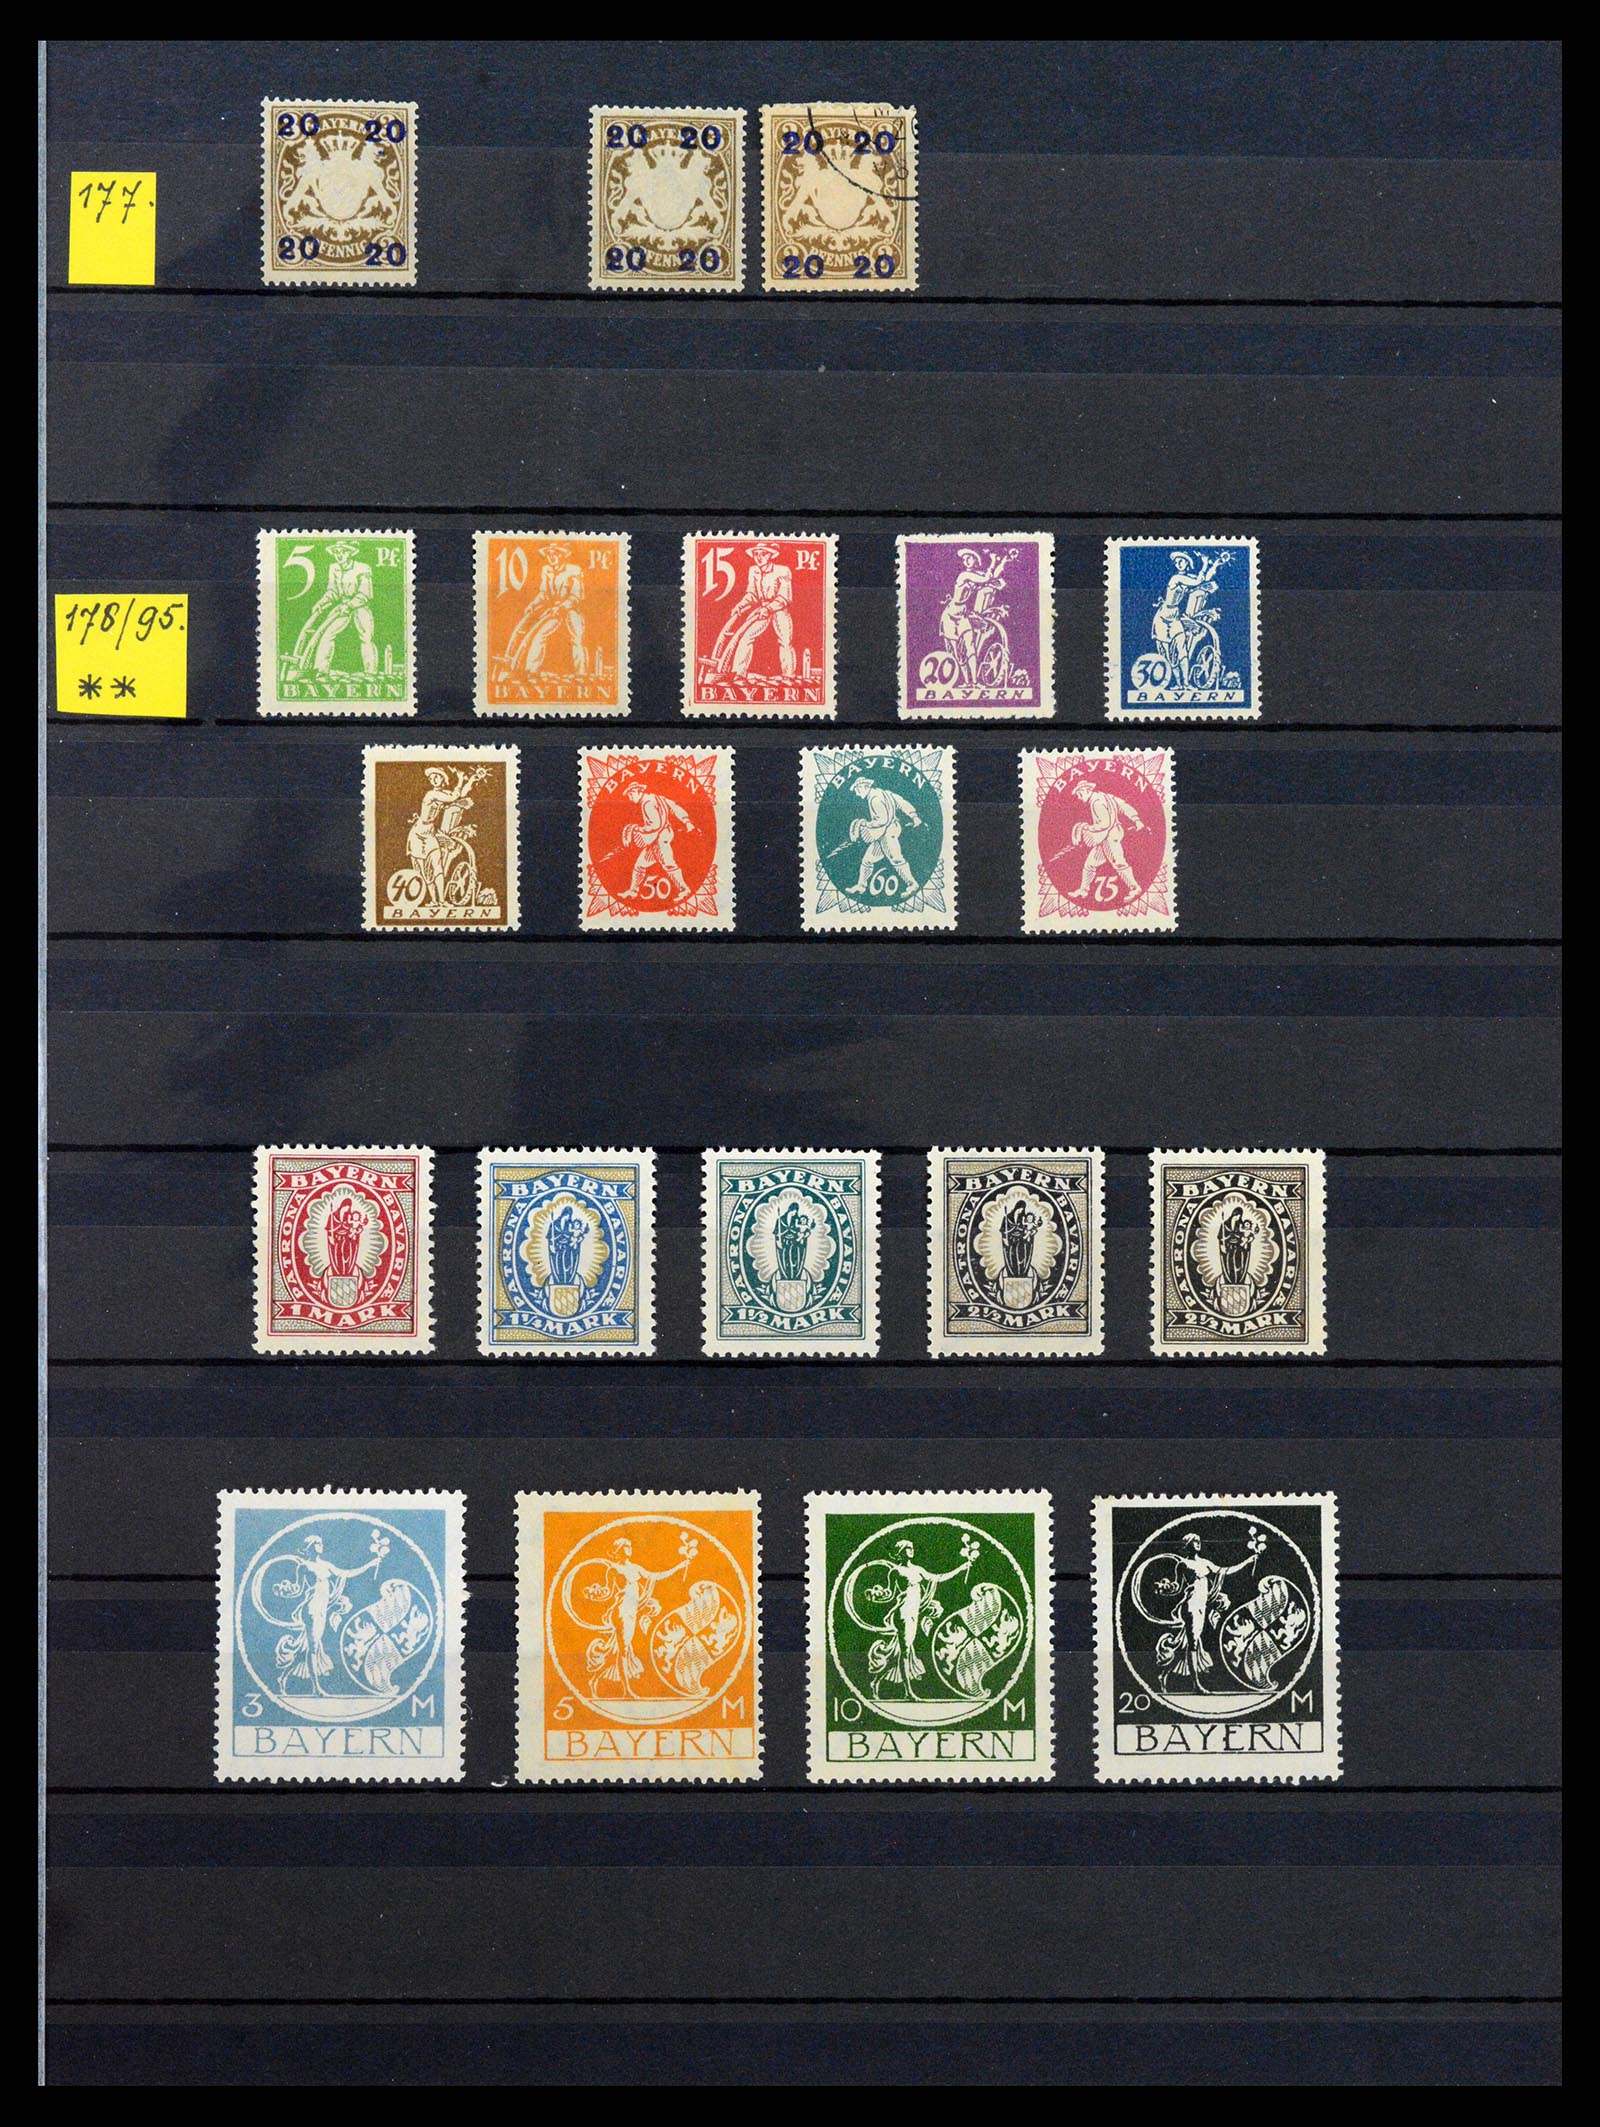 37235 005 - Stamp collection 37235 Germany 1872-1990.